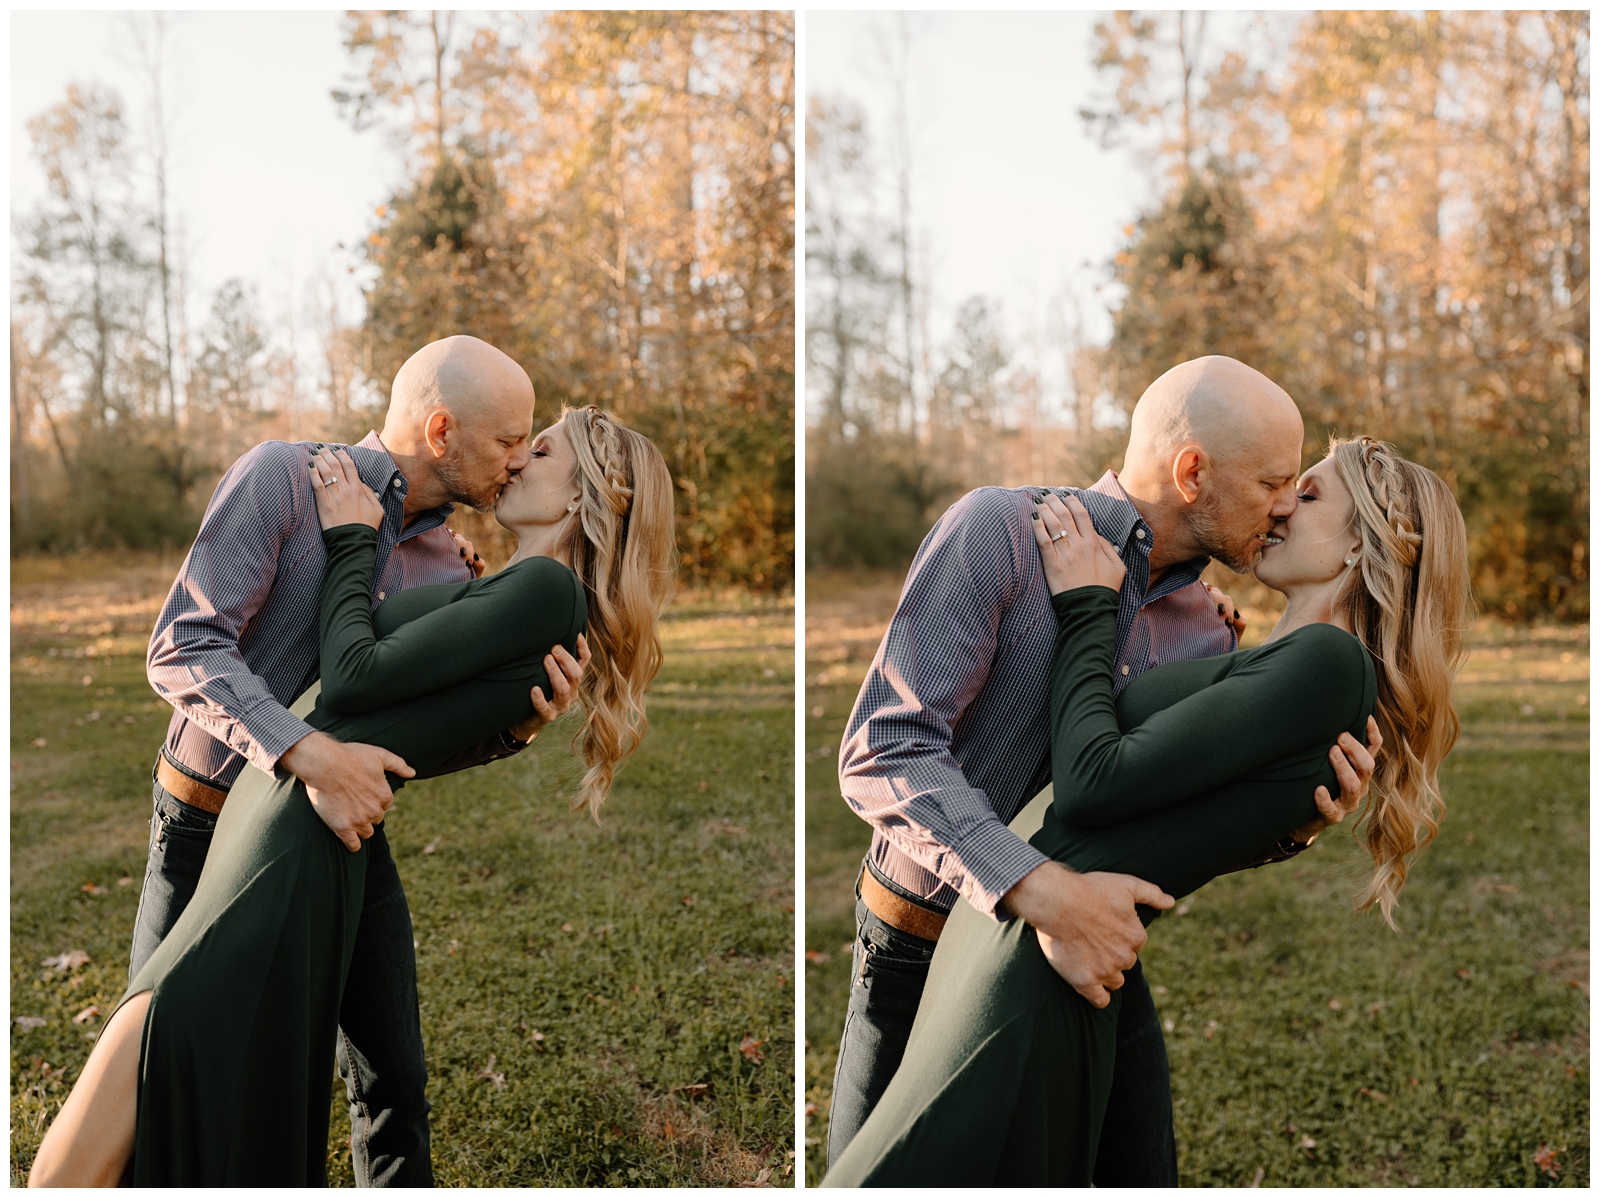 Intimate yet carefree engagement session in the Greensboro area, by Winston-Salem, Charlotte, and Raleigh North Carolina photographer